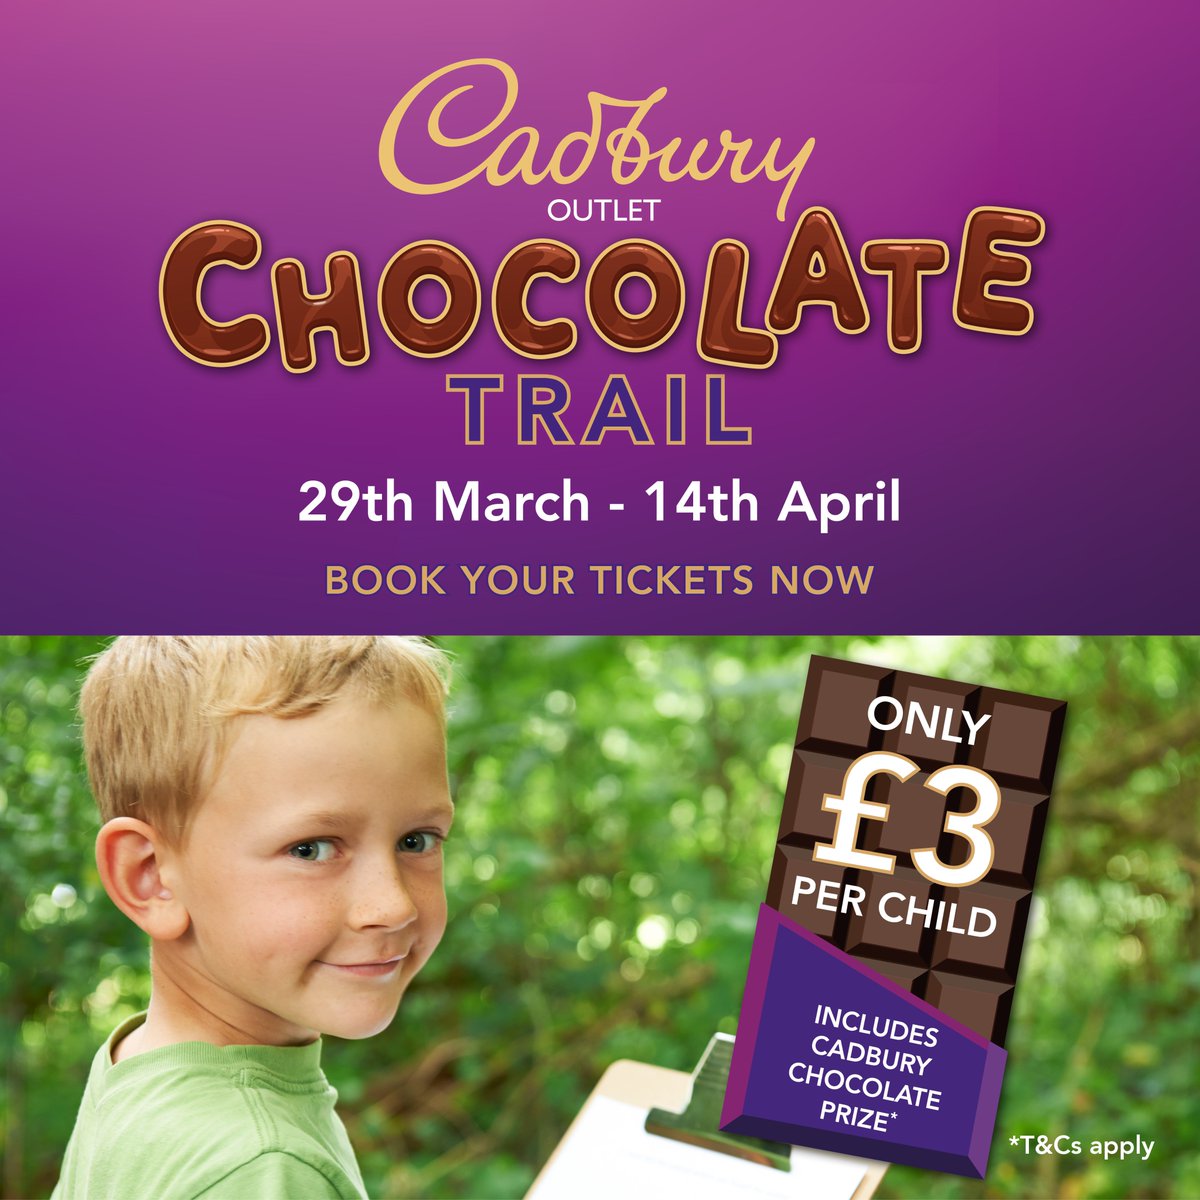 🌟 Due to popular demand, the CADBURY OUTLET CHOCOLATE TRAIL returns to Springfields this upcoming school Easter Holiday! Book early and you can reserve your tickets for just £3 each! More details: springfieldsoutlet.co.uk/events/ 🍫